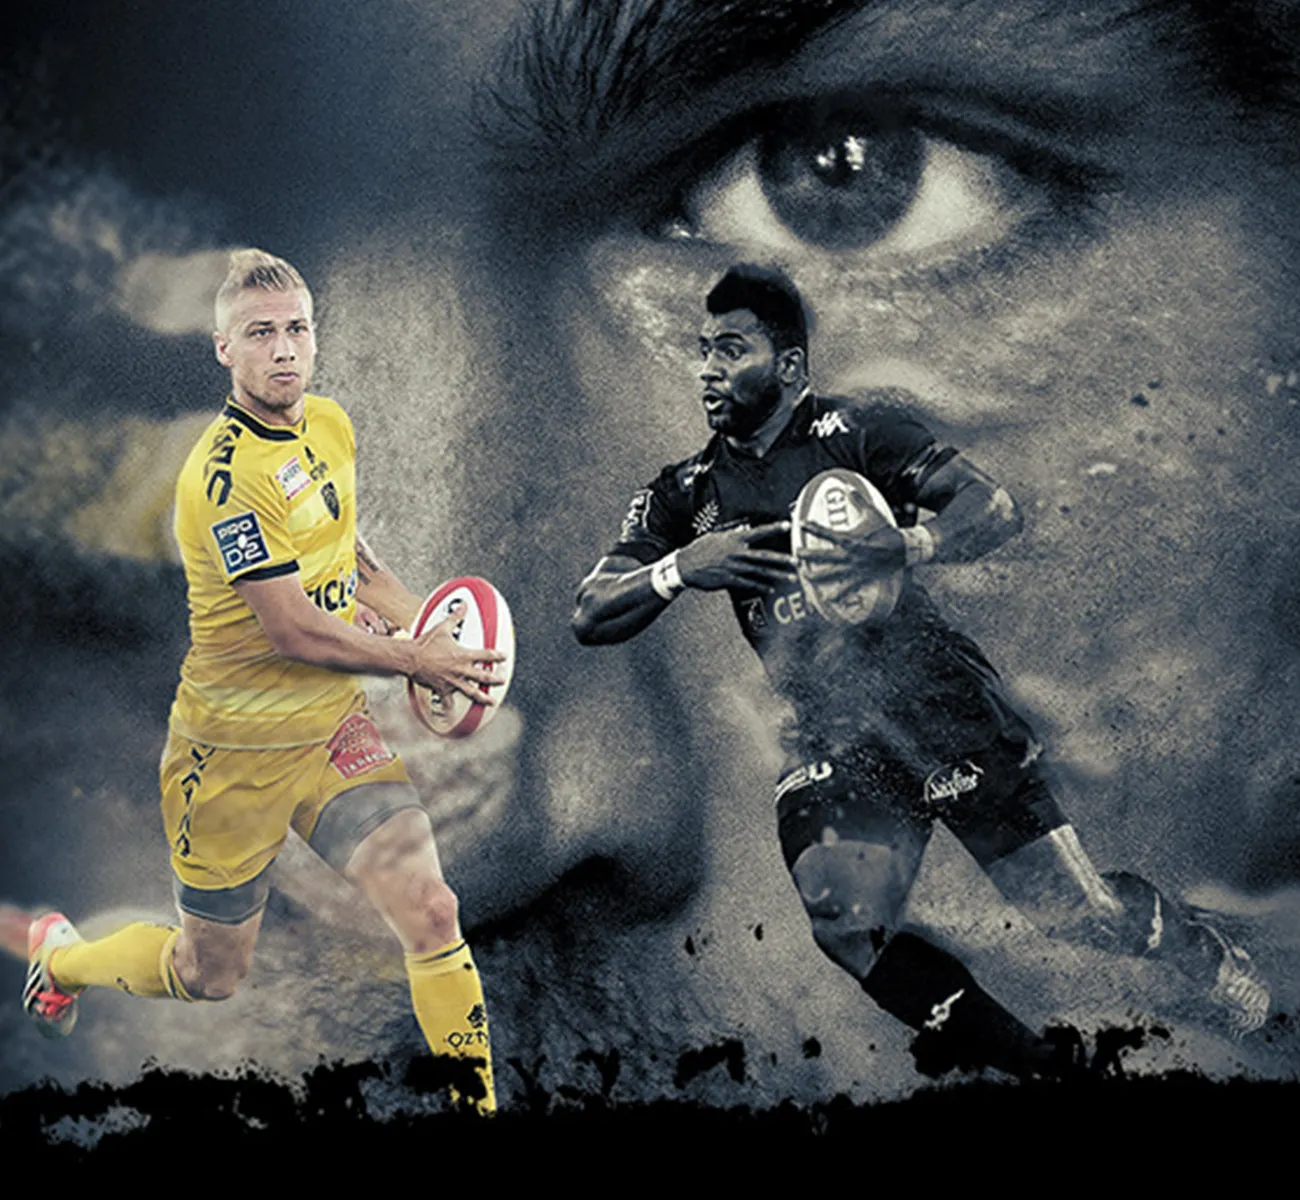 Image couverture projet affiche sportive Provence Rugby page portfolio